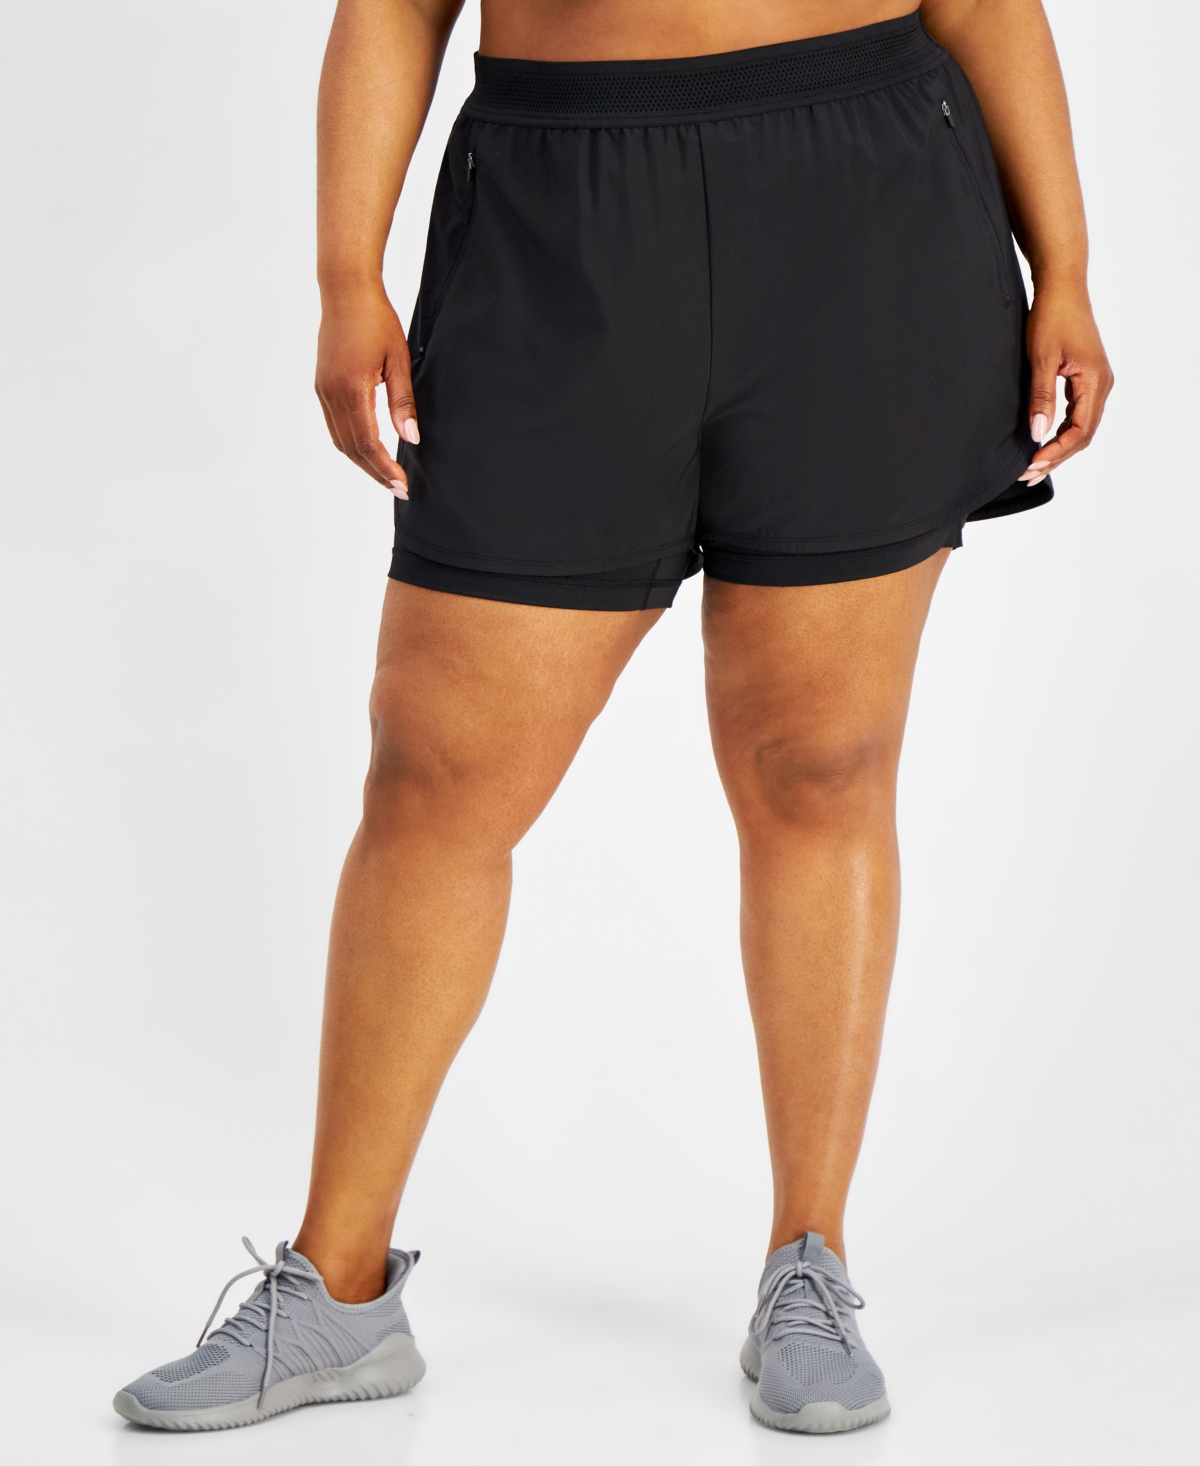 Plus Size 3-In-1 Running Shorts, Created for Macy's - Bright White